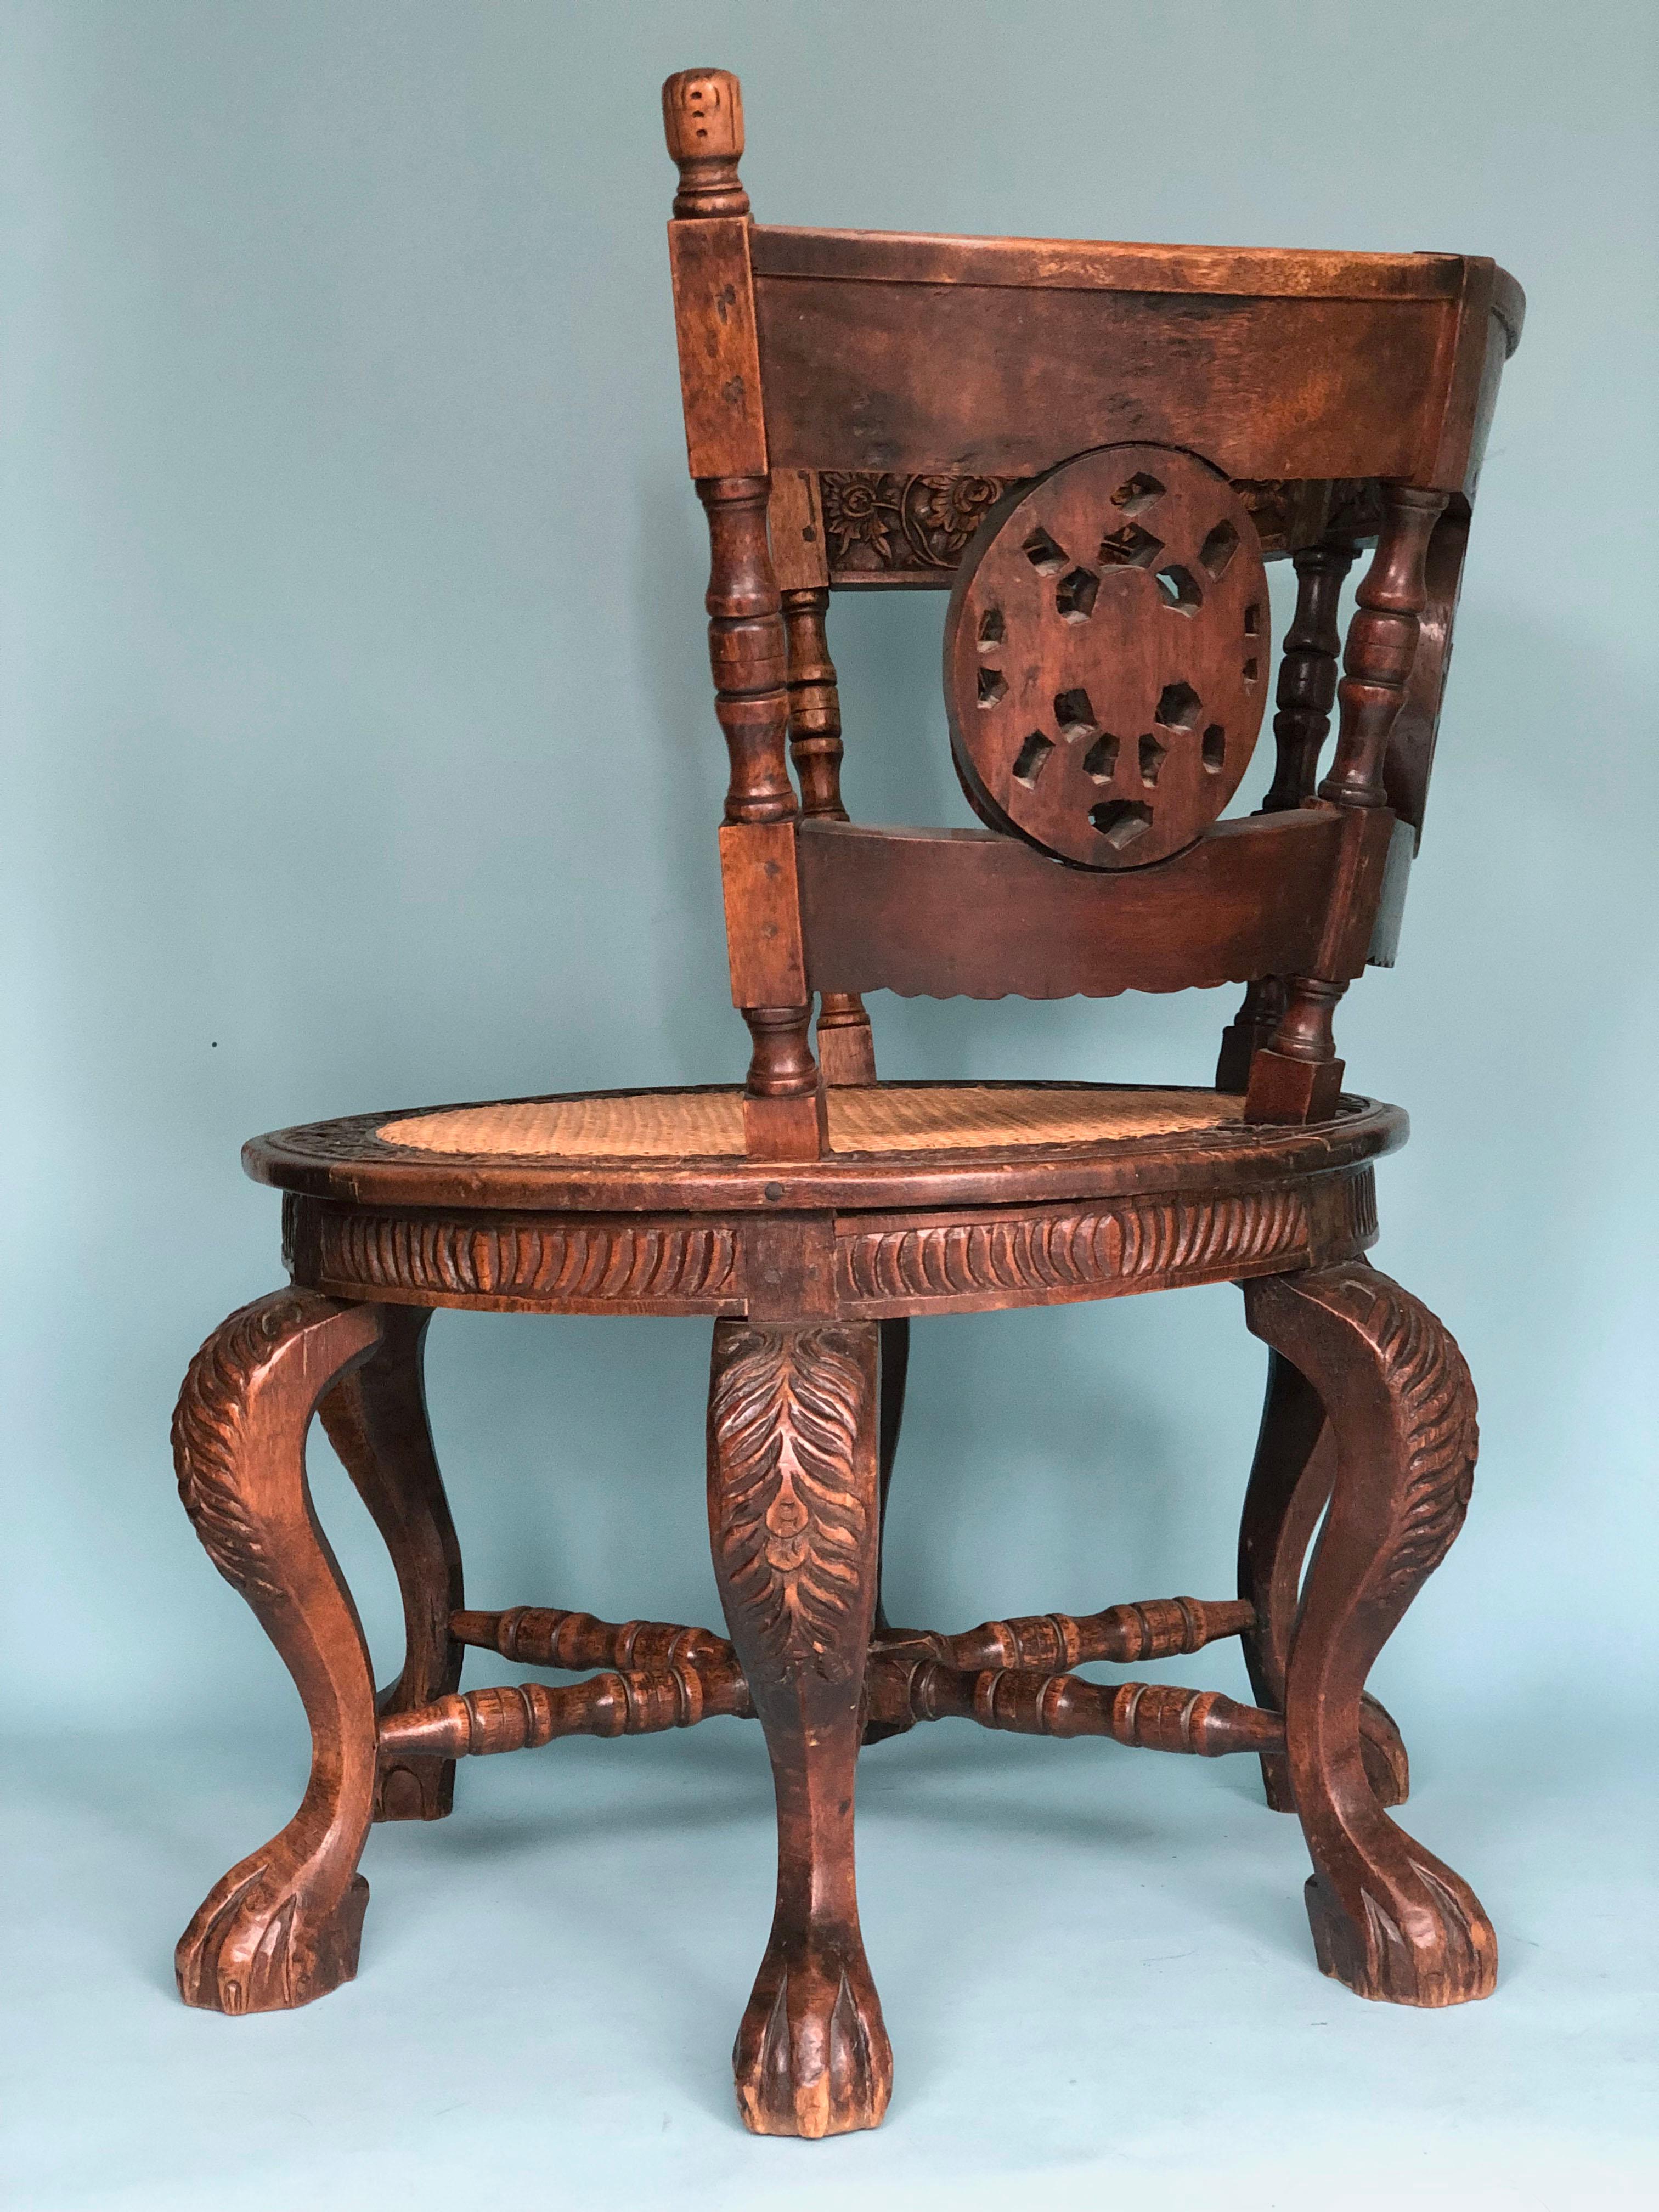 Dutch Colonial Teakwood 'Burgomaster' Chair 19th Century In Good Condition For Sale In Bjuråker, SE